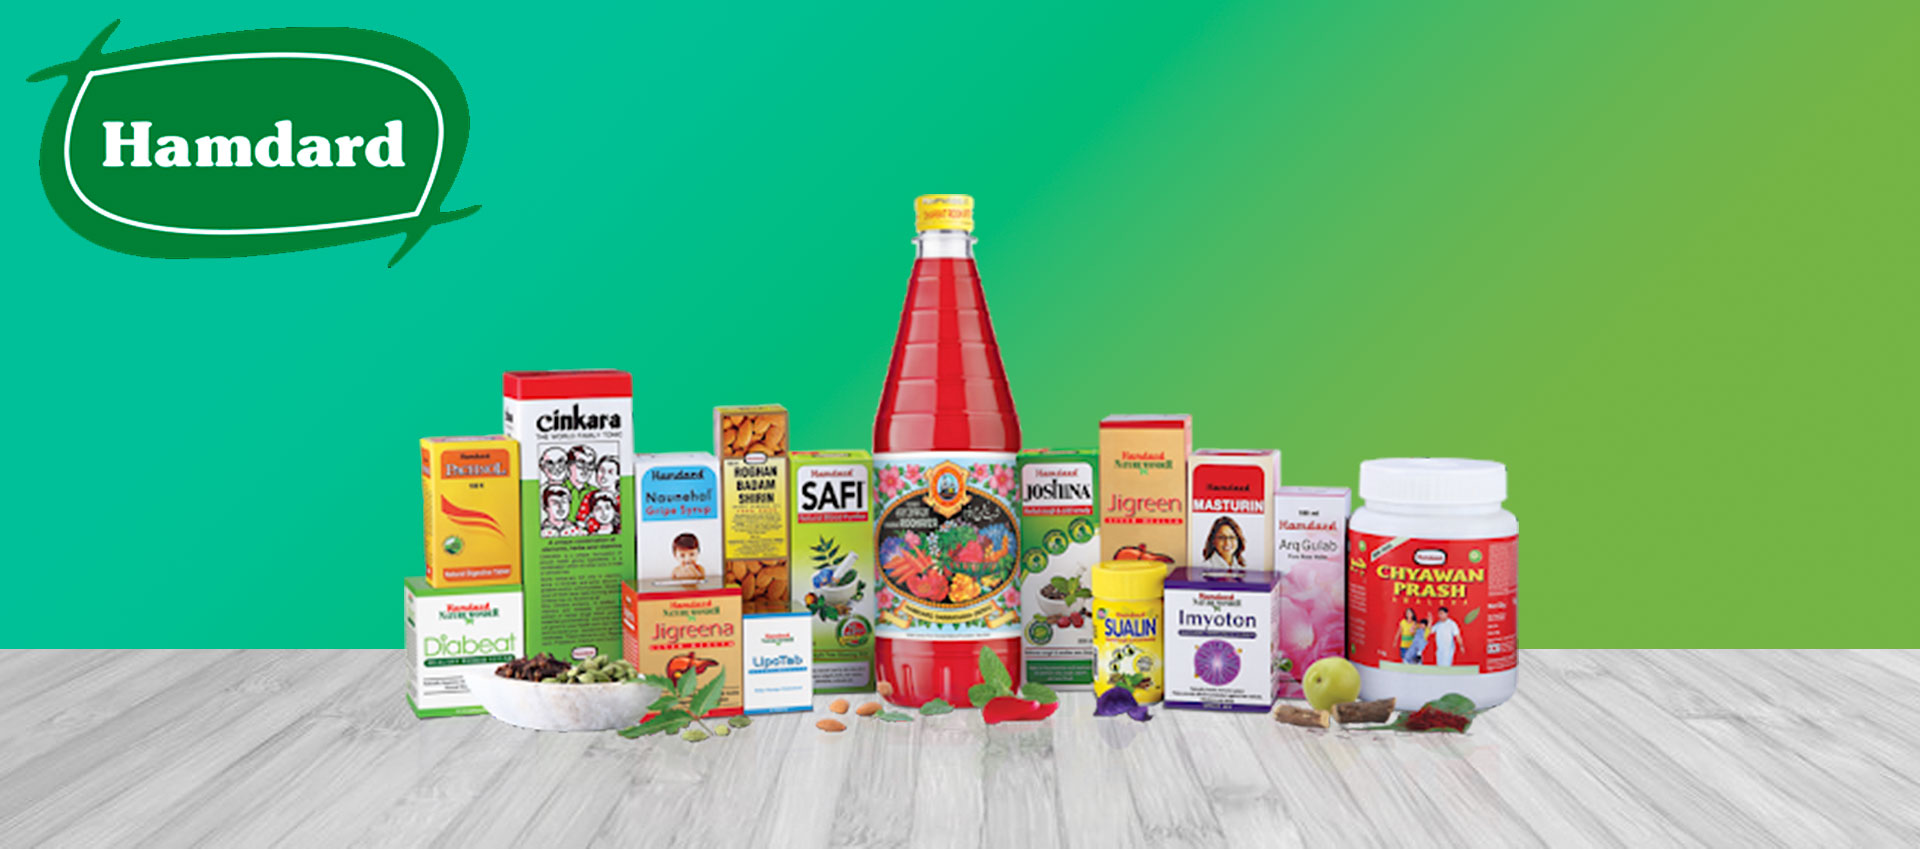 Hamdard Products in Pakistan - Medicinal and Herbal Items Available Online